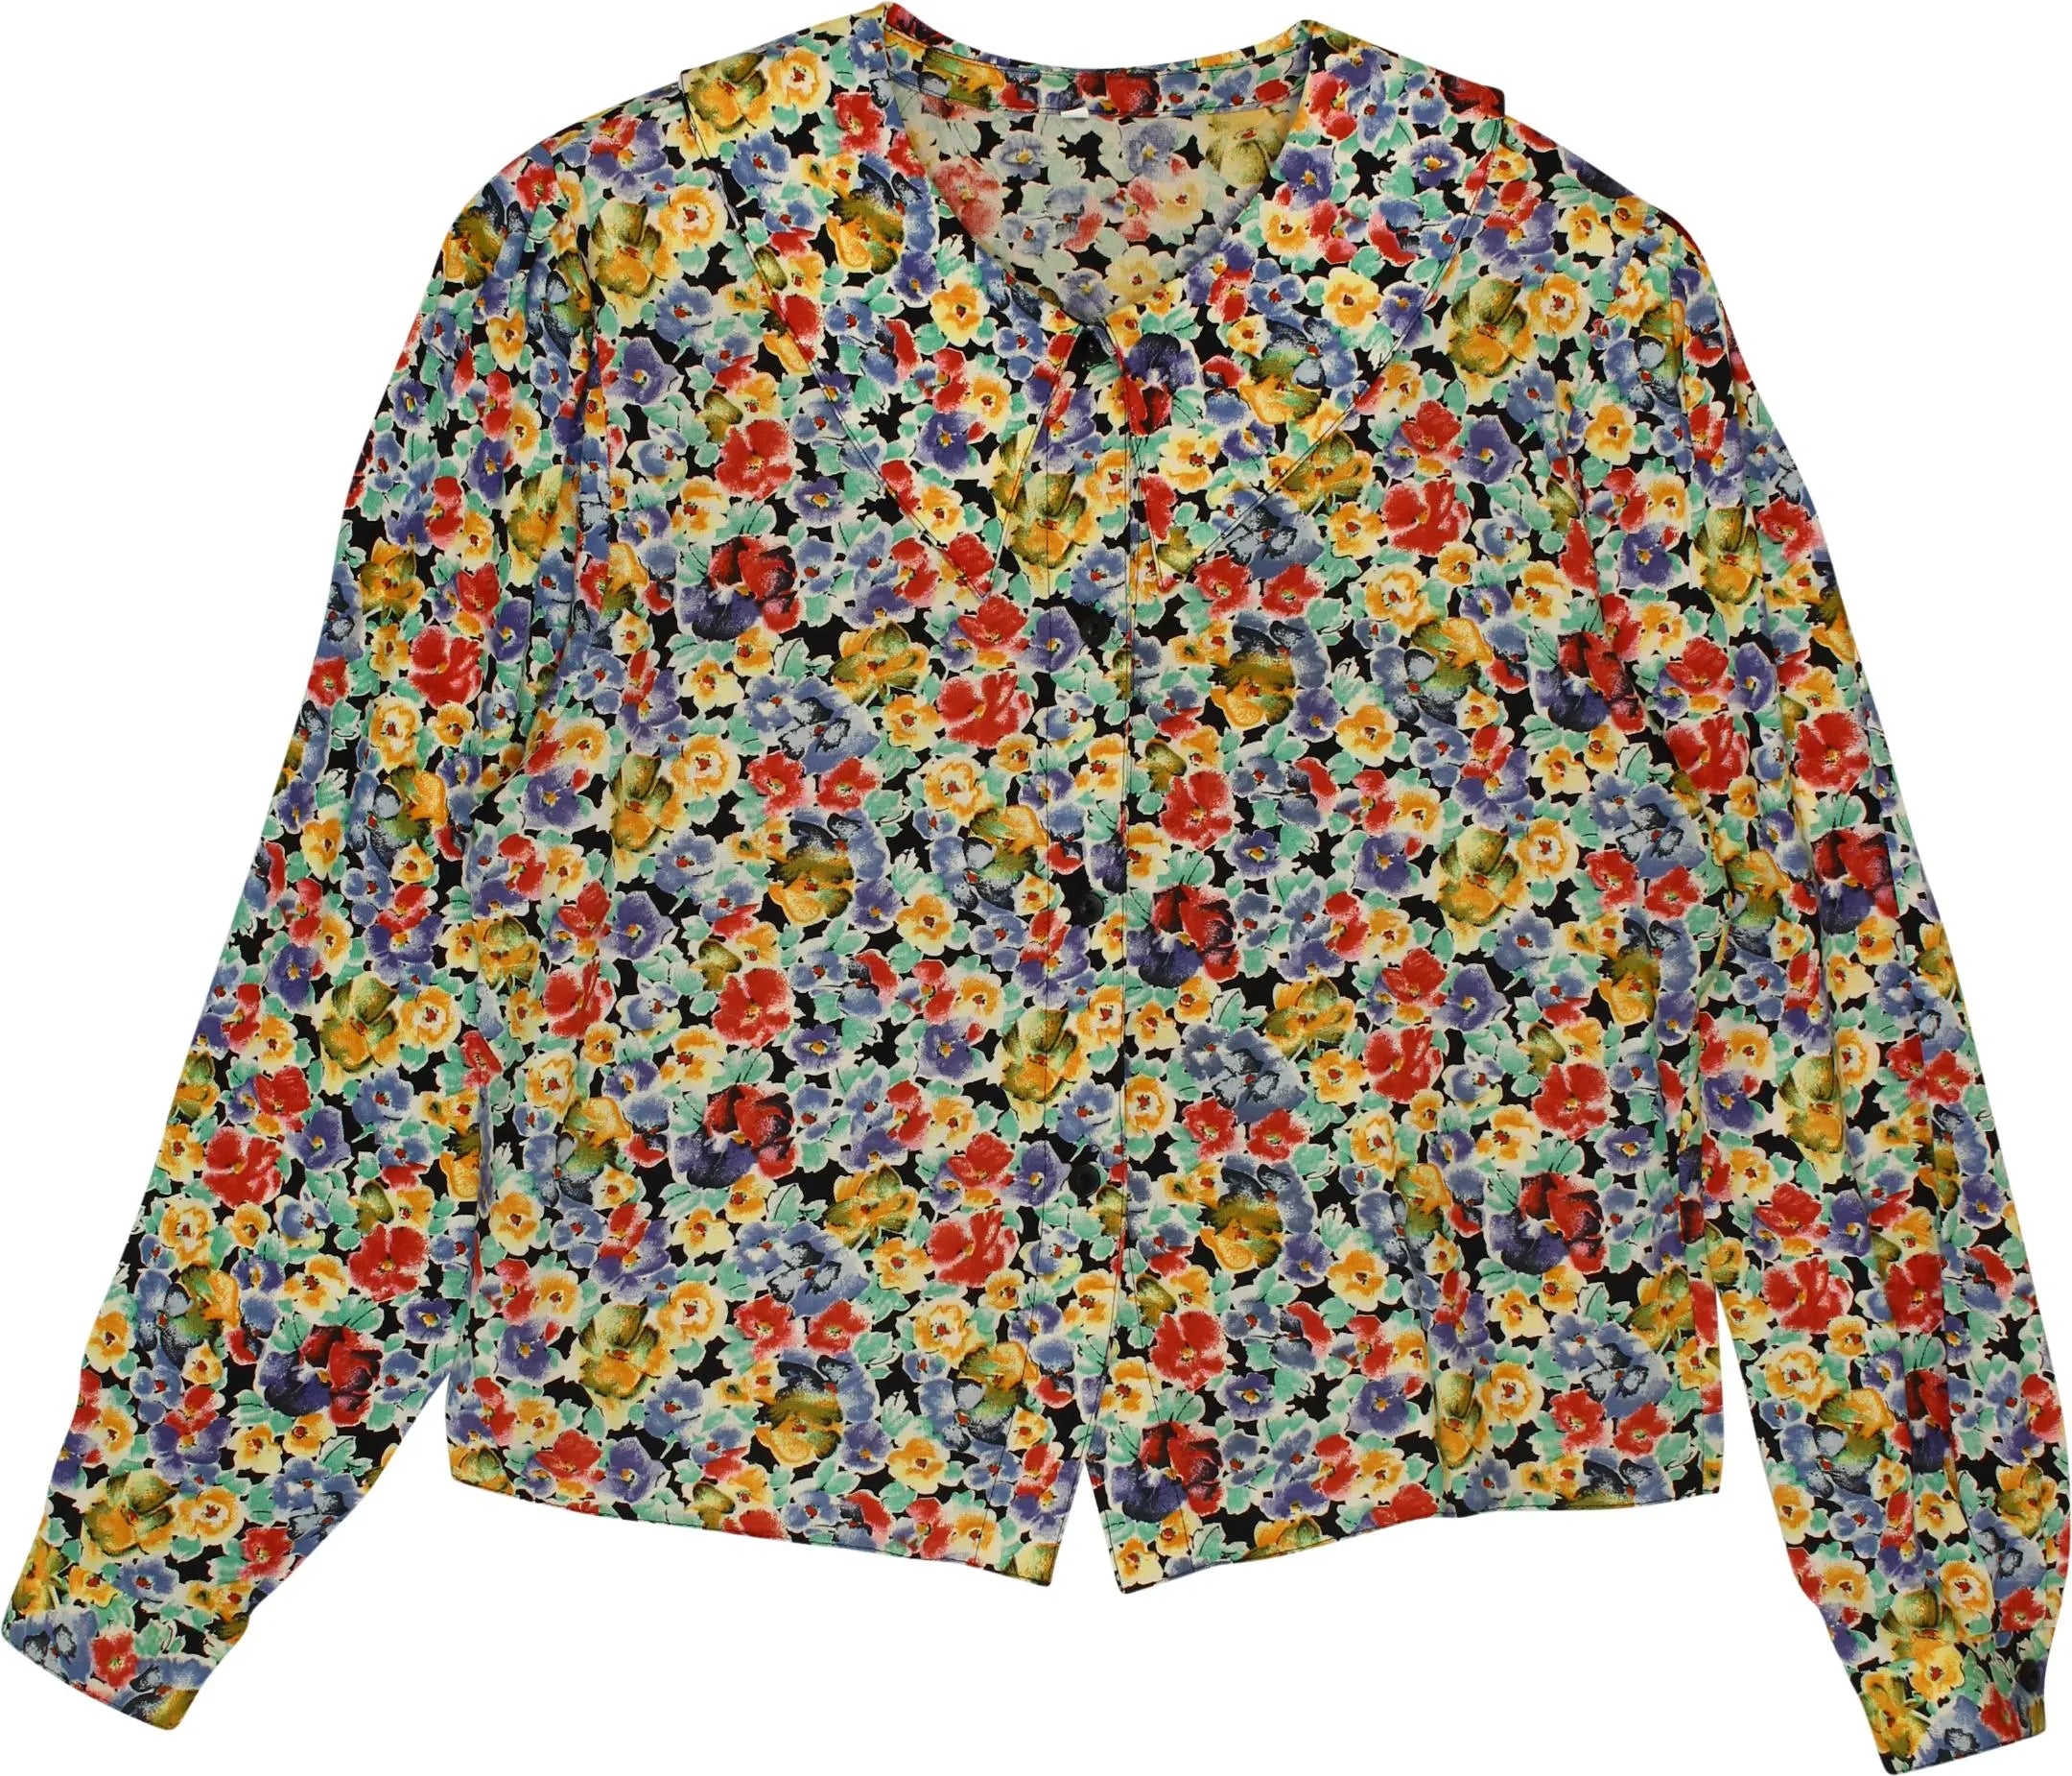 Unknown - 80s Floral Blouse with Shoulder Pads- ThriftTale.com - Vintage and second handclothing